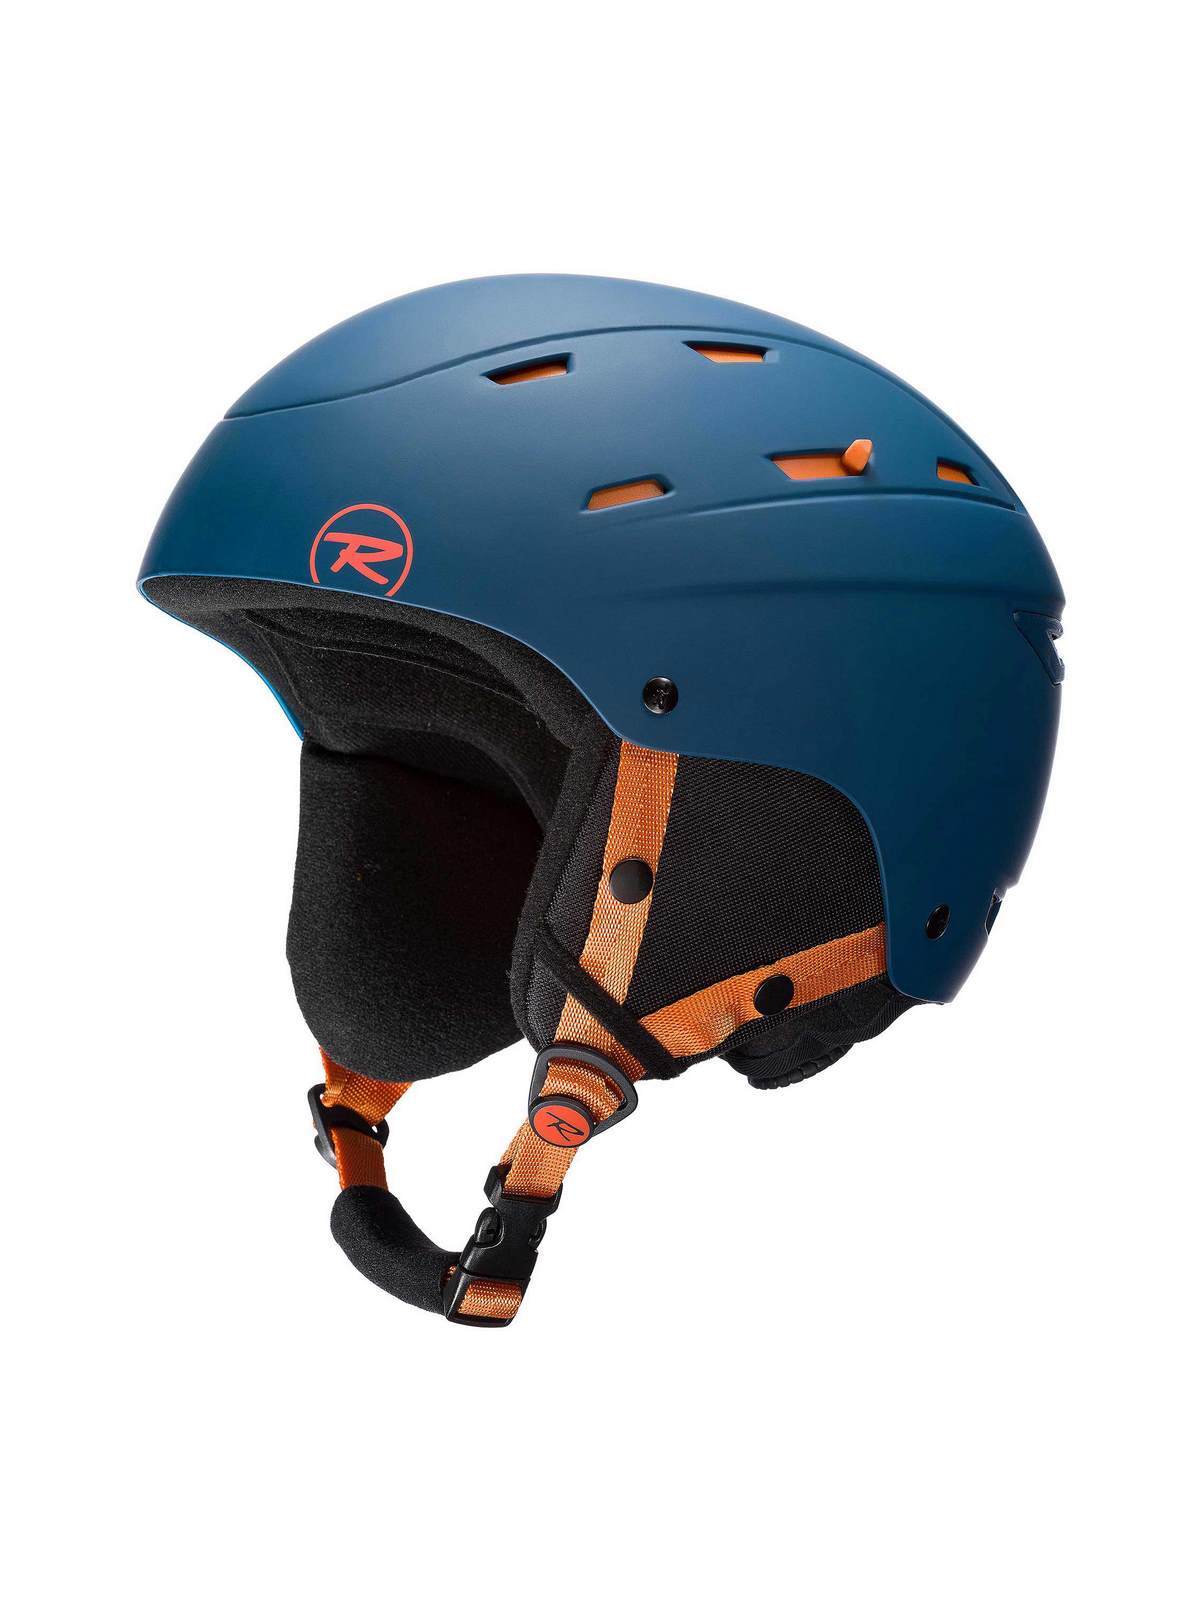 Kask Narciarski ROSSIGNOL REPLY IMPACTS - BLUE